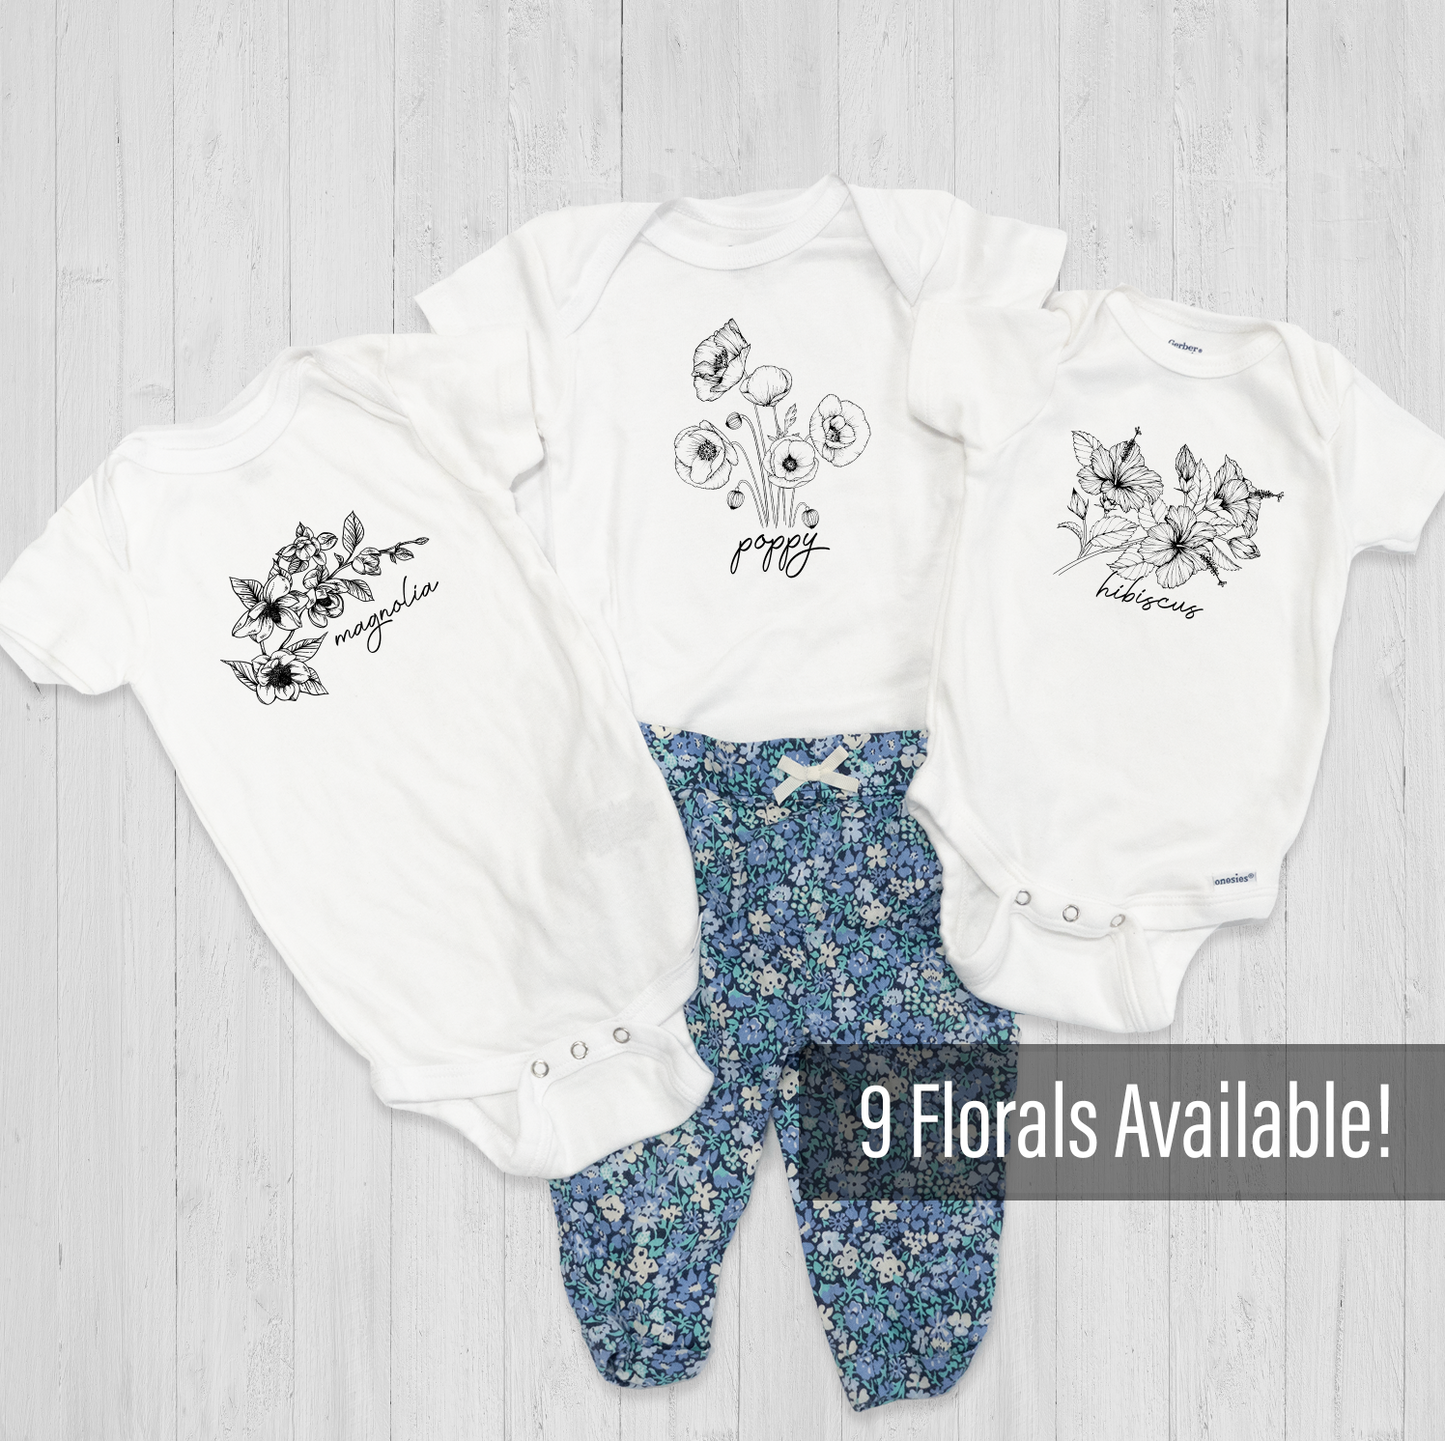 Black and White Floral Bodysuit Collection